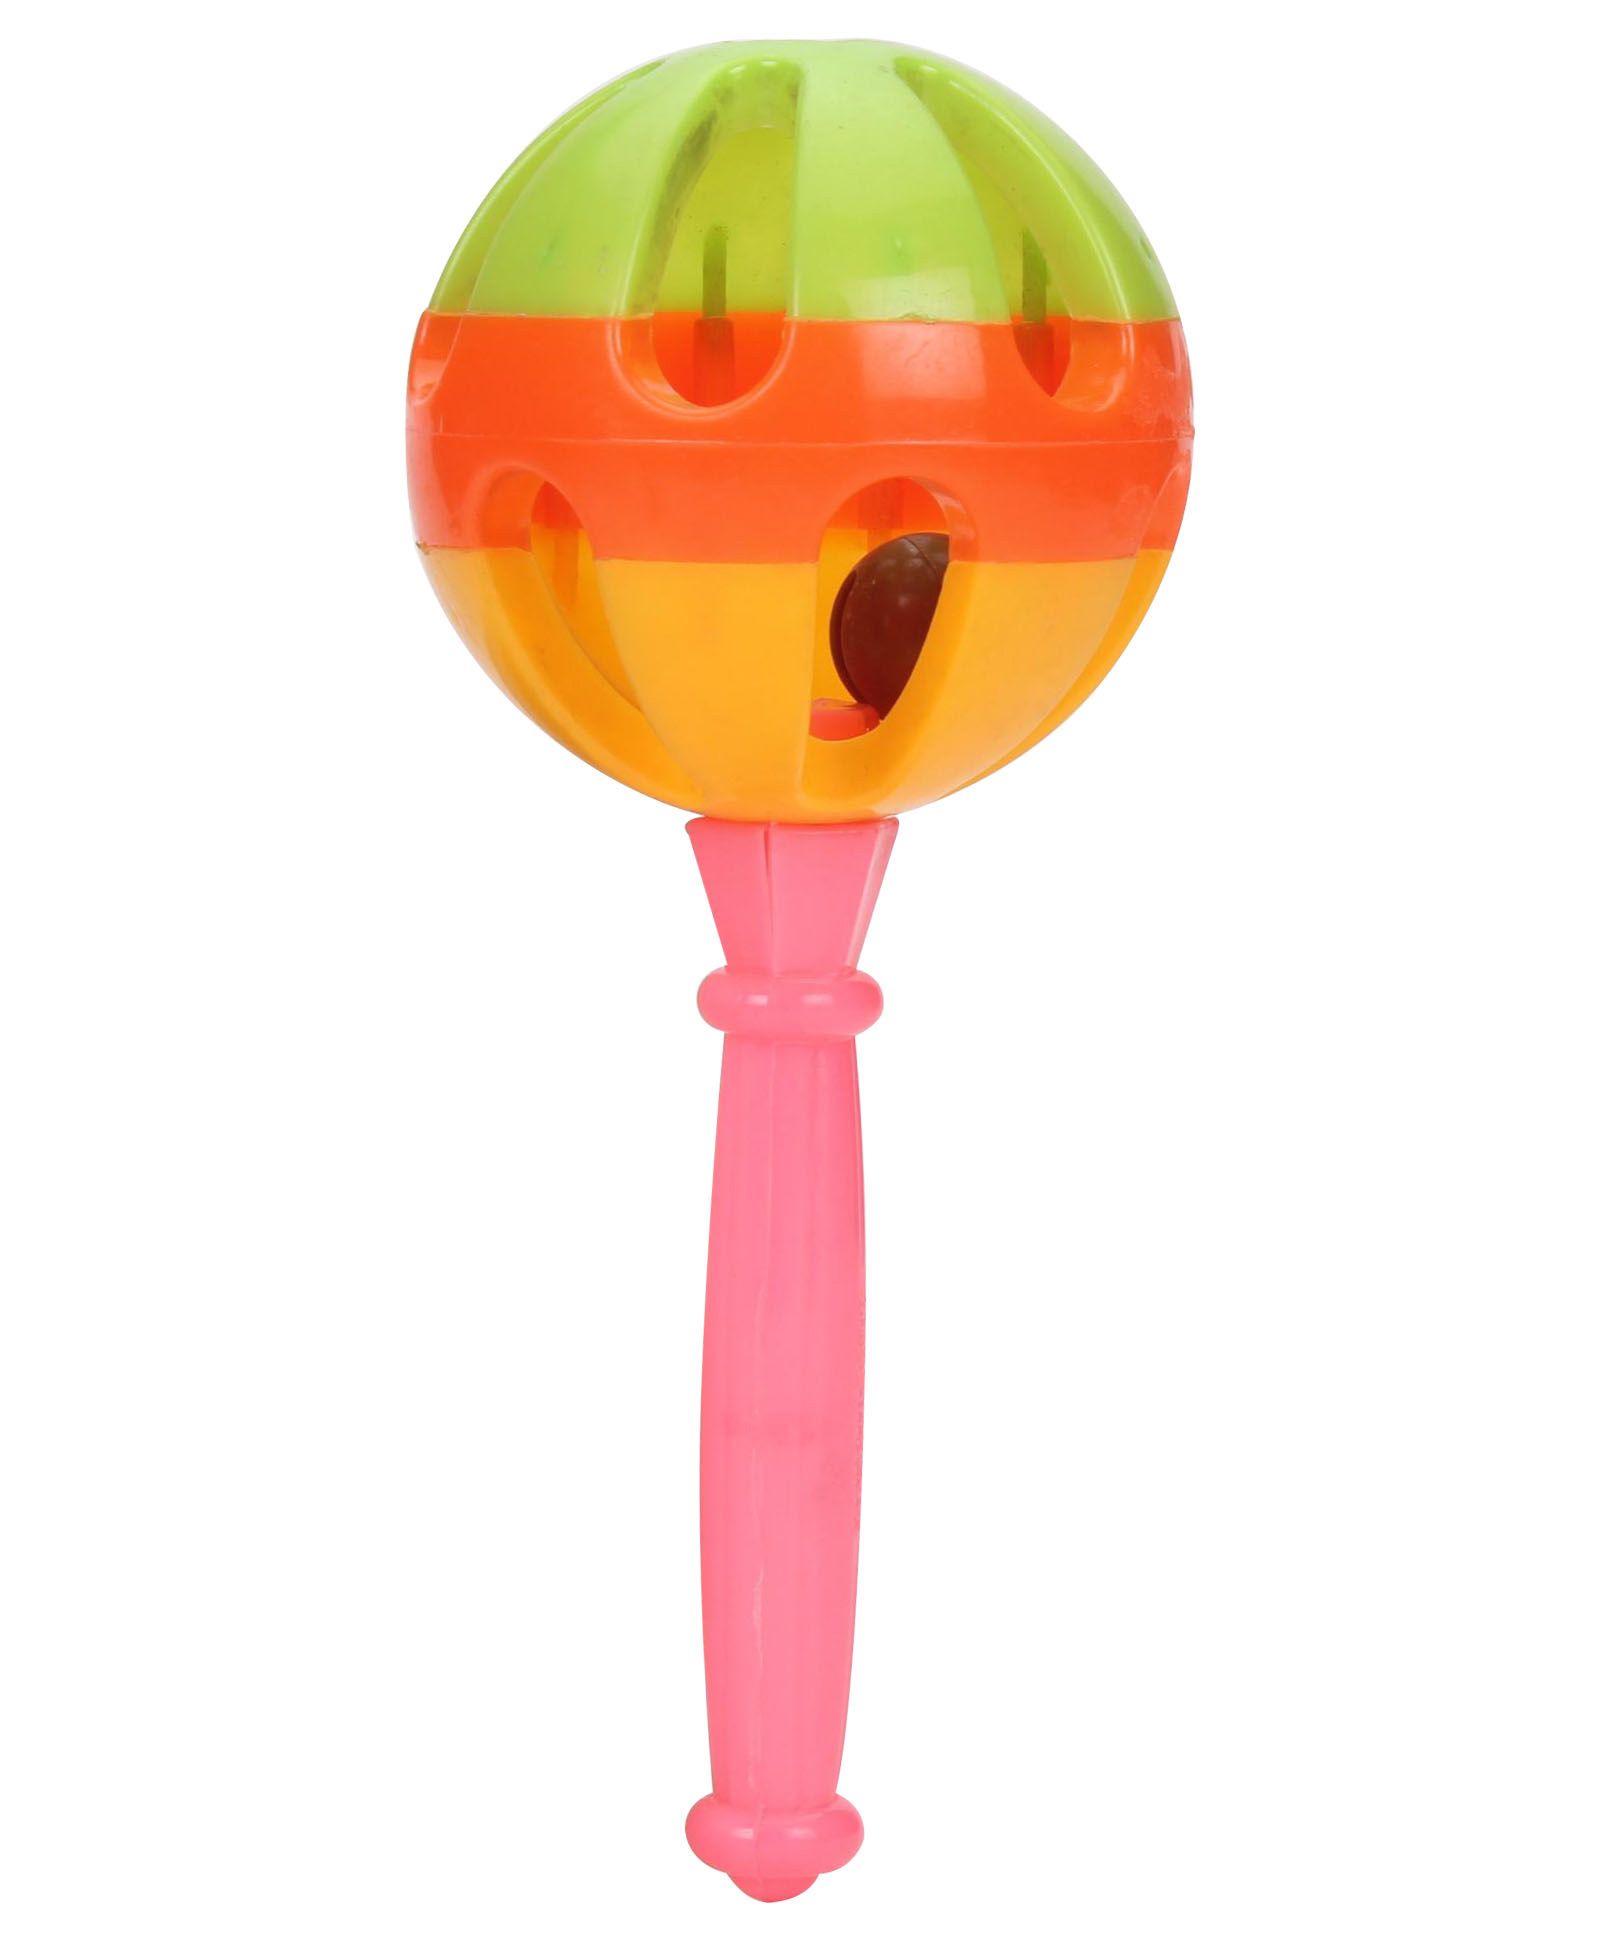 Musical Rattle Toy for Kids Fun Tool